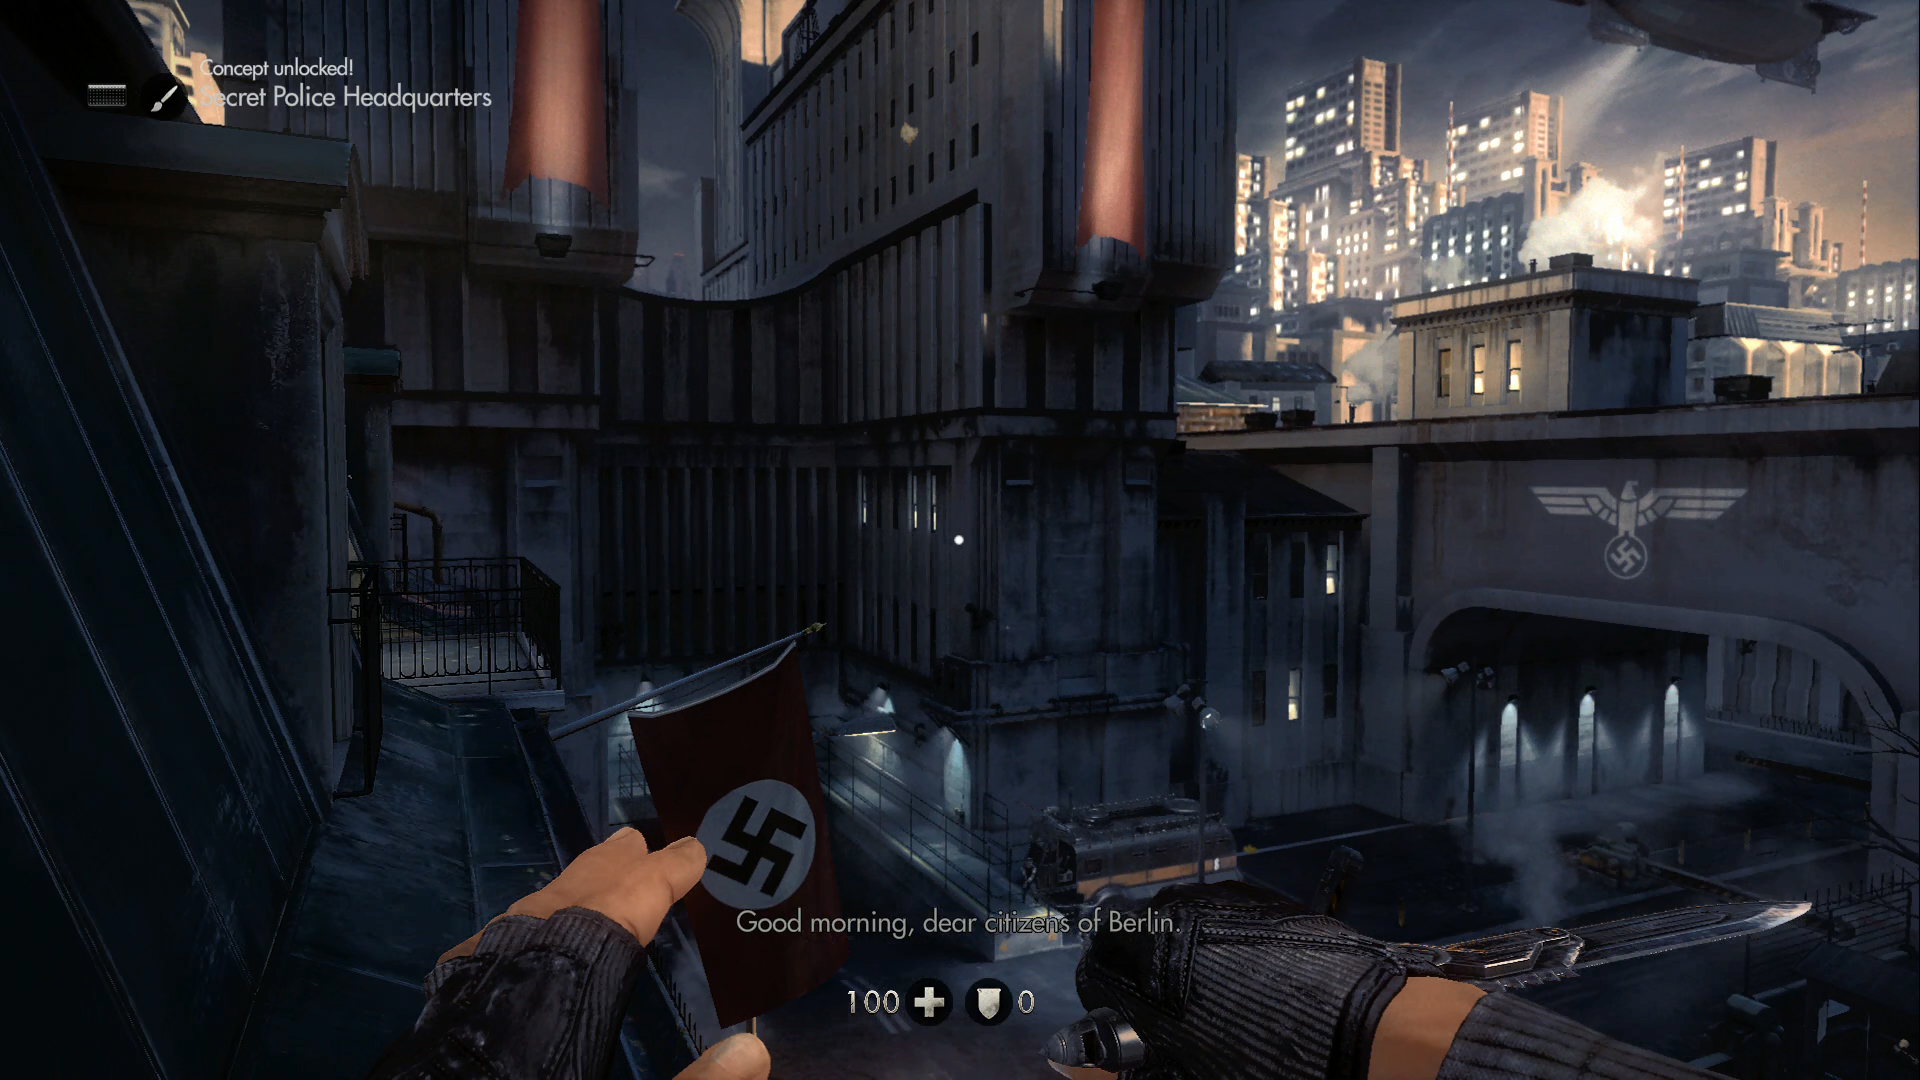 Wolfenstein Backgrounds, Compatible - PC, Mobile, Gadgets| 1920x1080 px